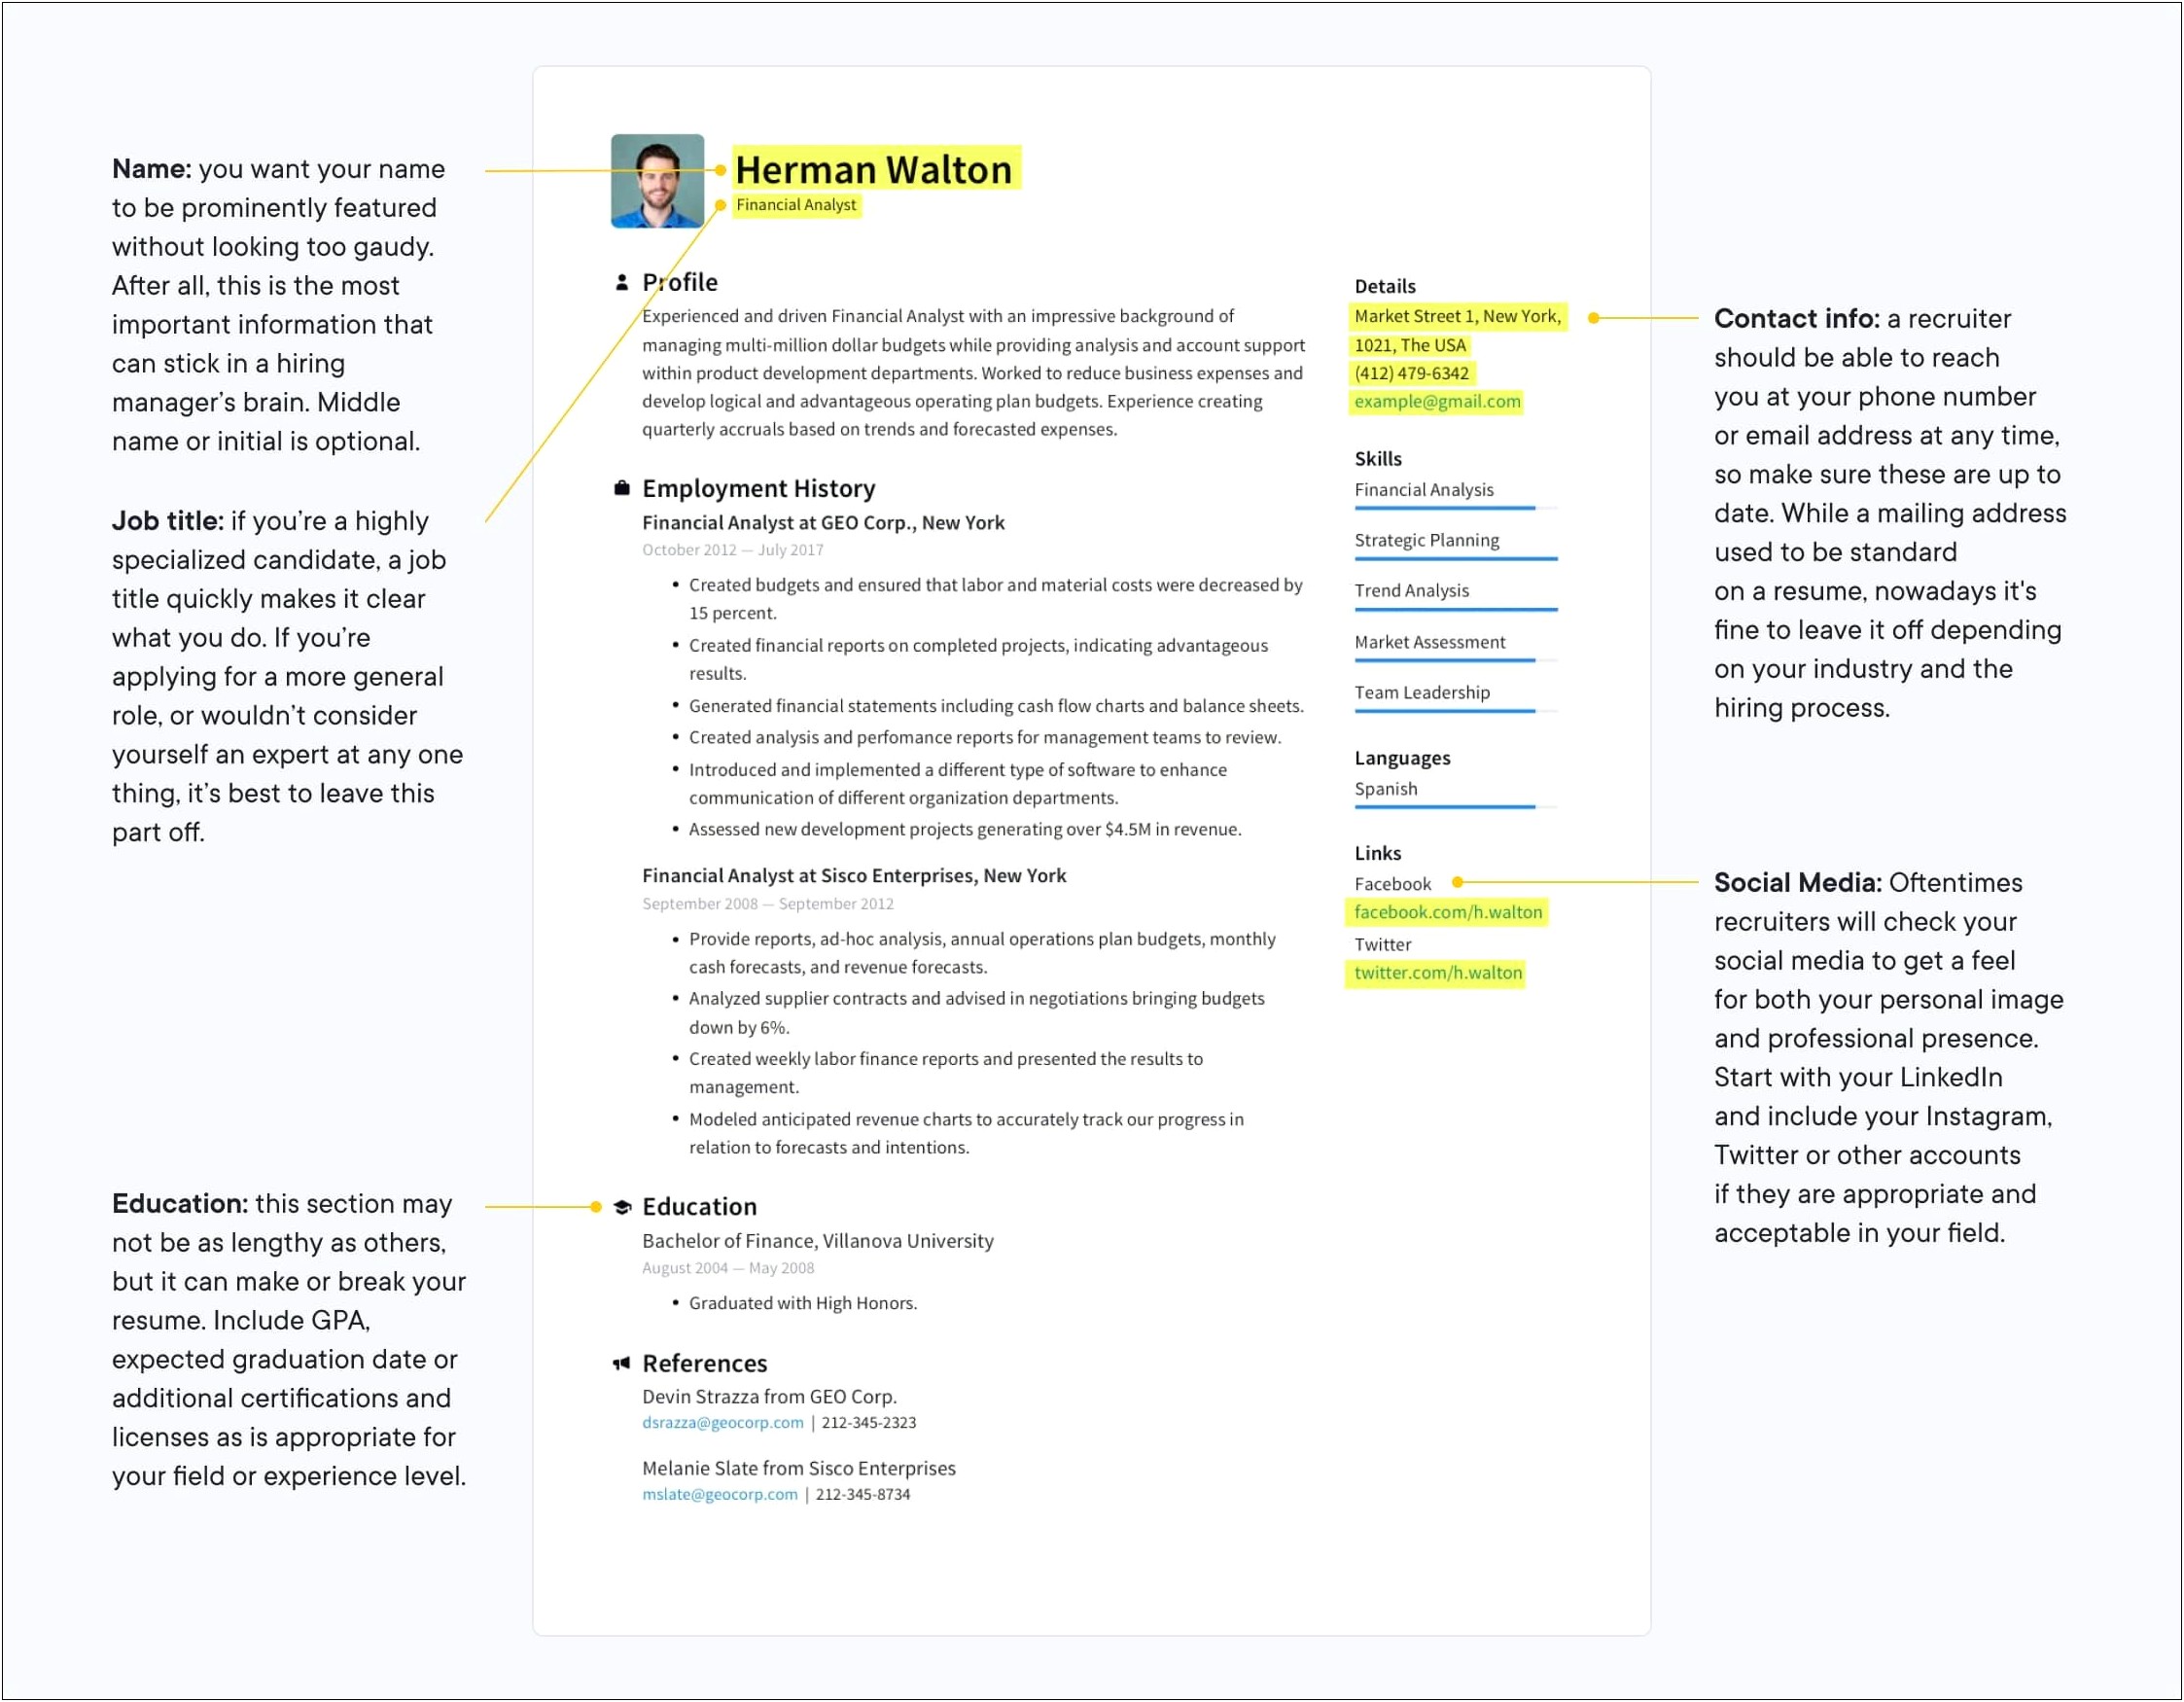 Resume Formats That Include Relevant Experience